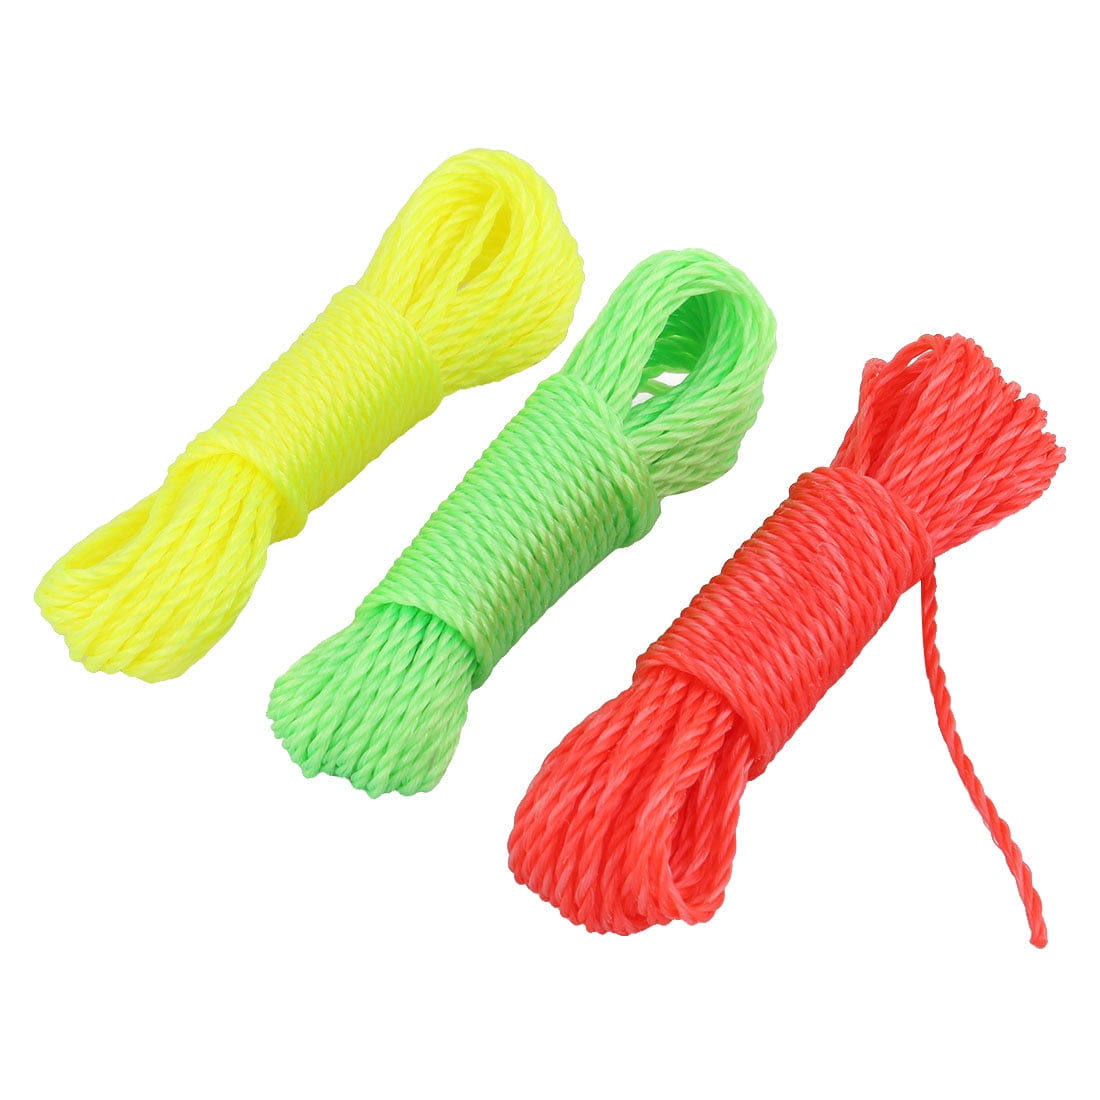 1pc x strong 10m  washing clothes thick rope line garden laundry dryer*RoP 